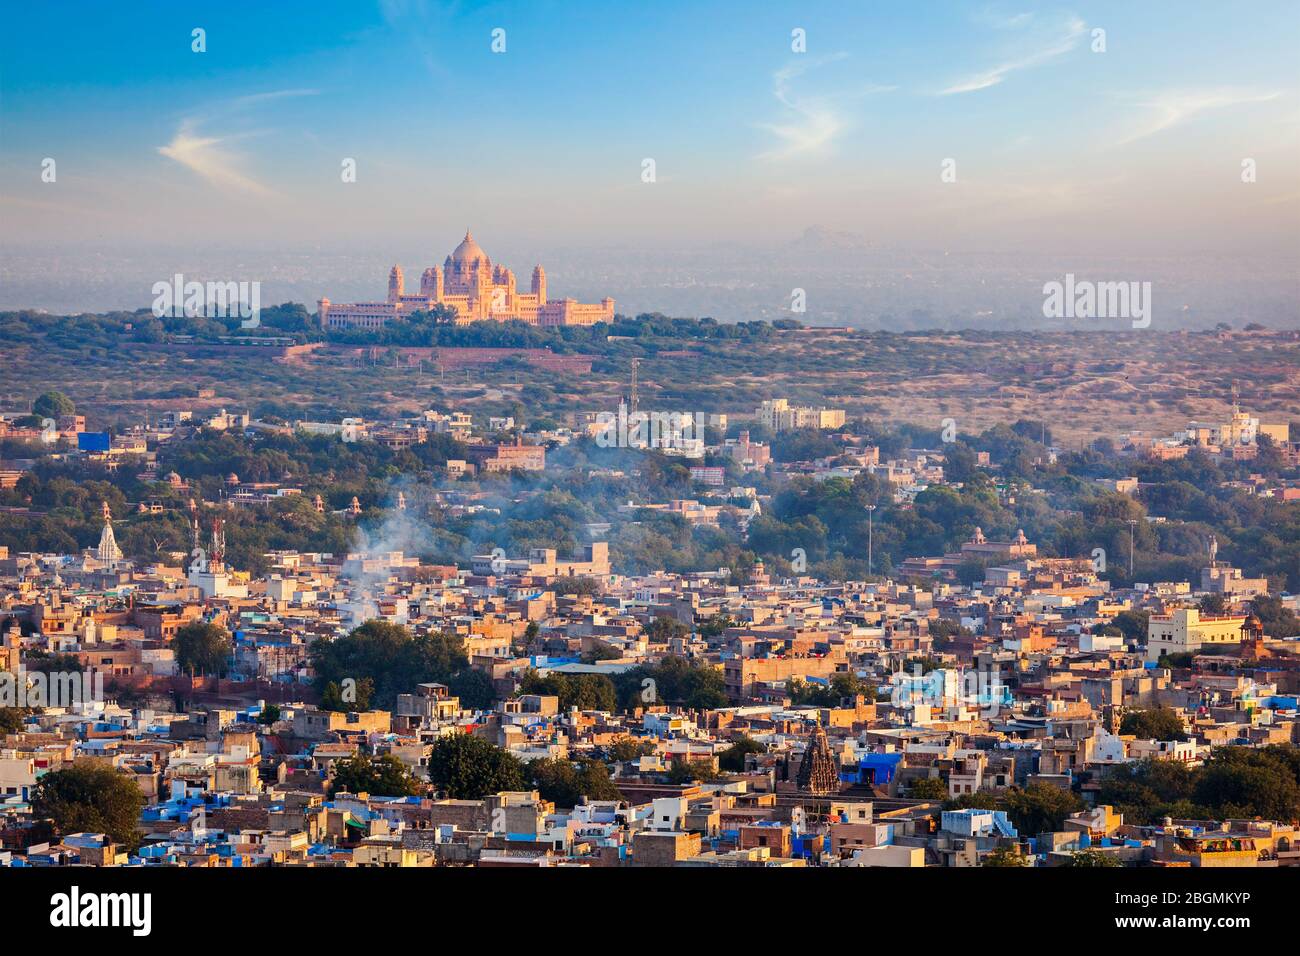 Aerial view of Jodhpur - the blue city. Rajasthan, India Stock Photo